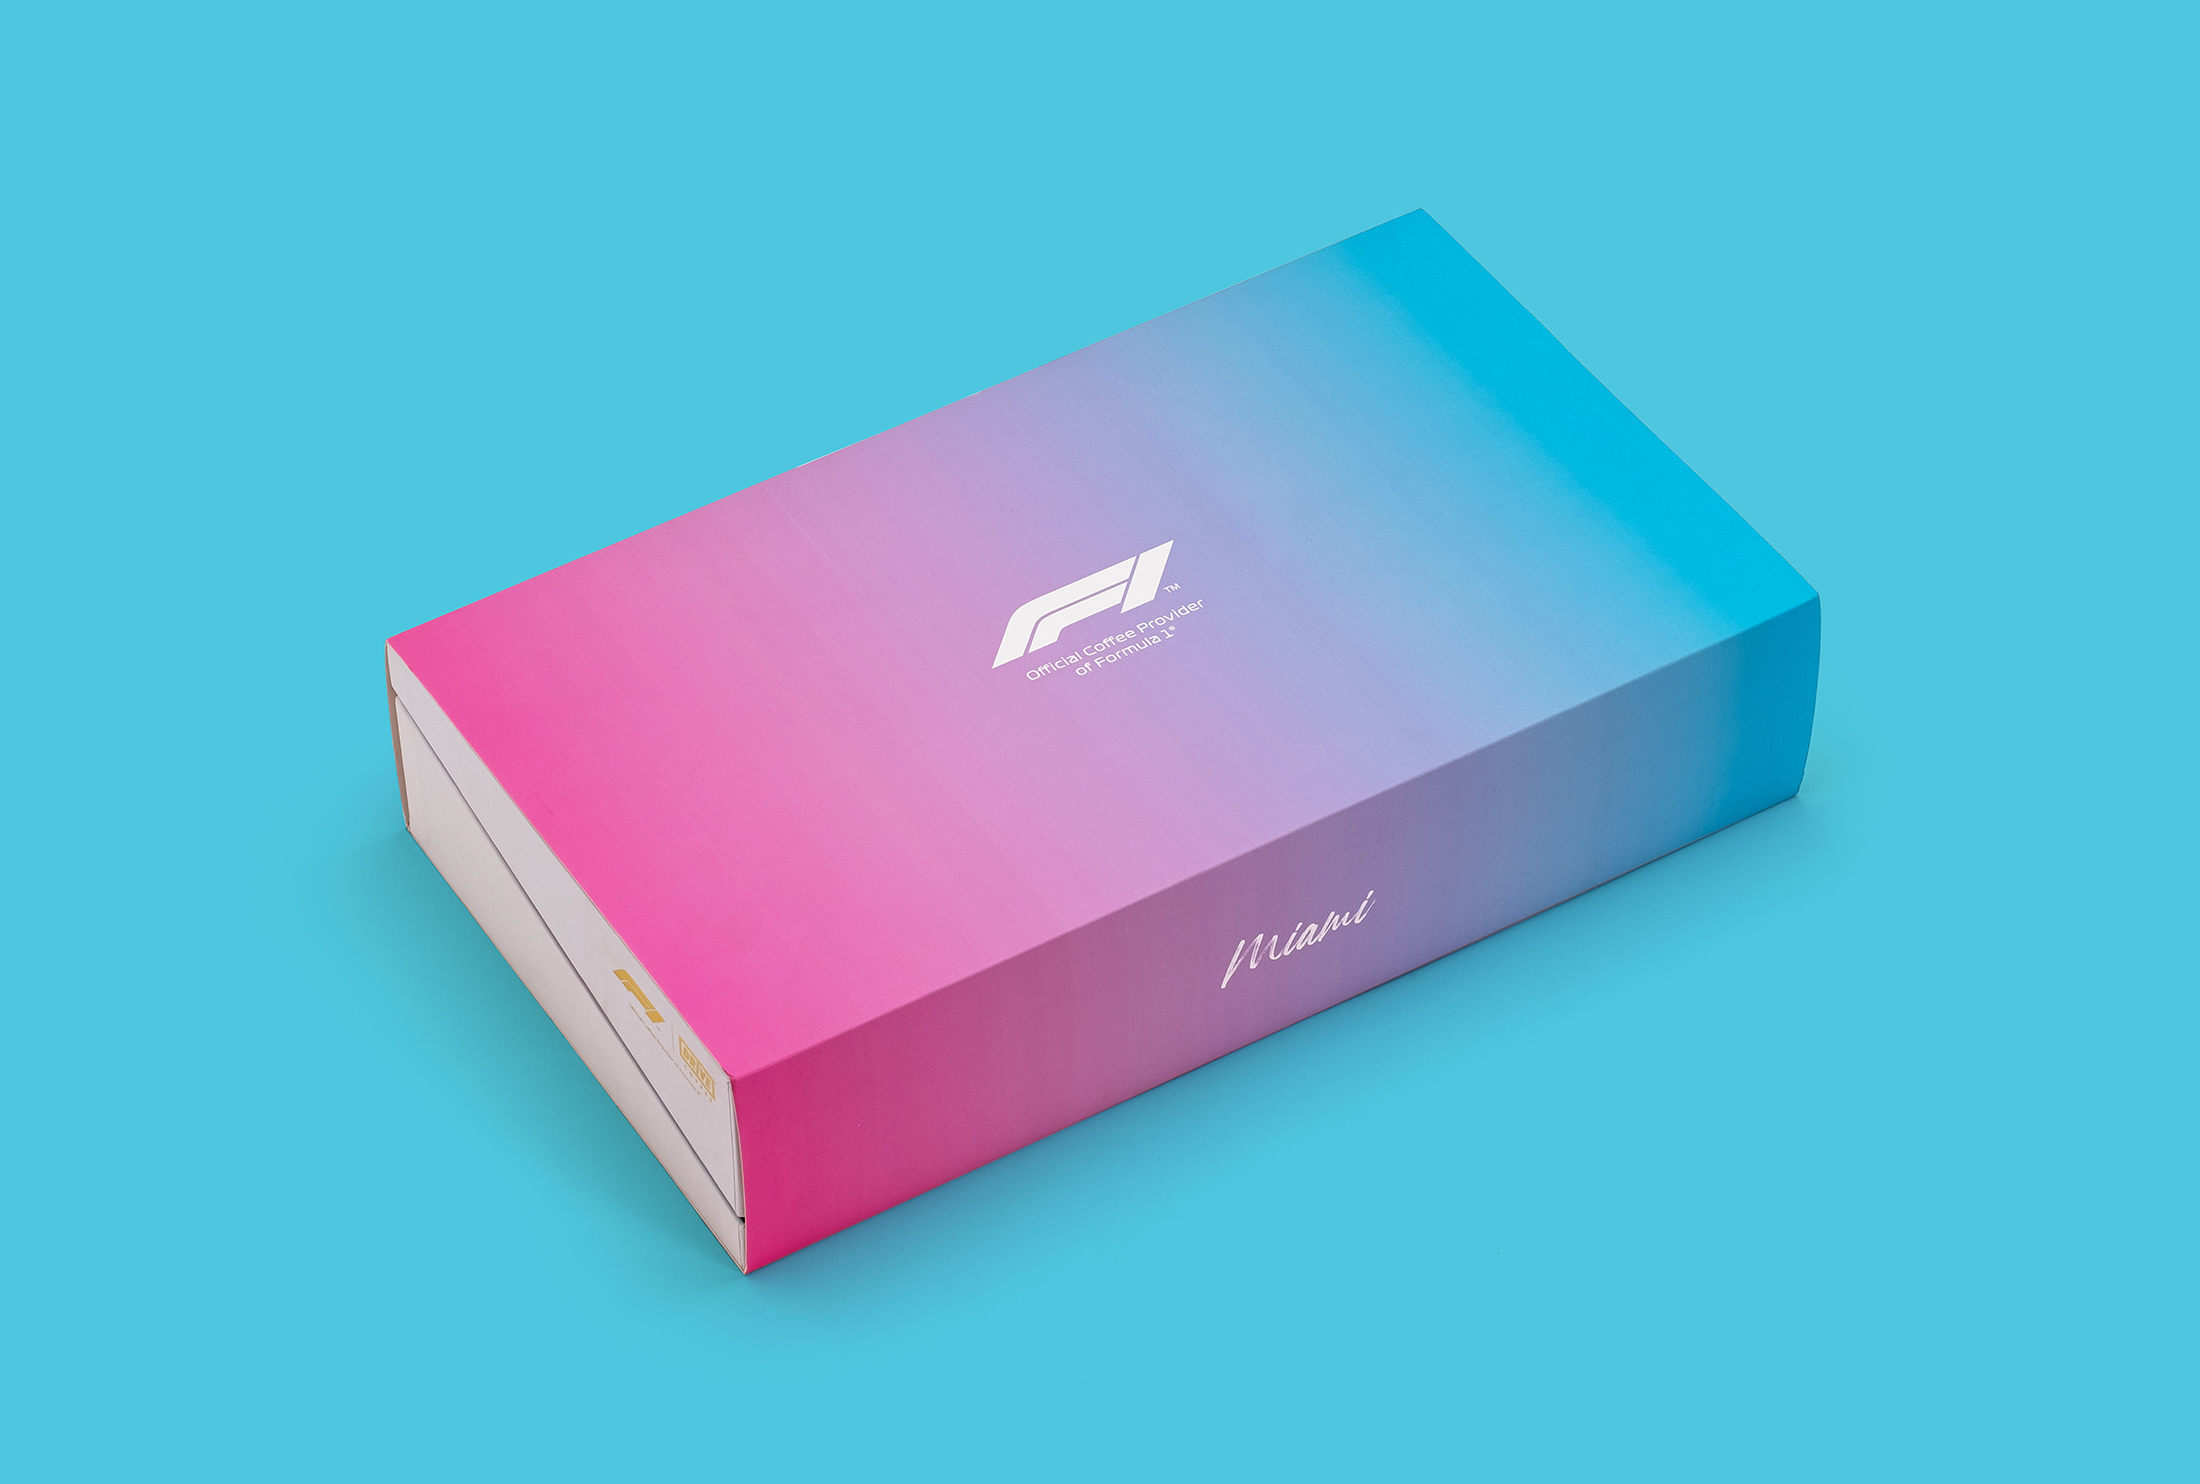 A full view of the packaging. The box is covered by a slipcase with the Formula 1 logo centered.